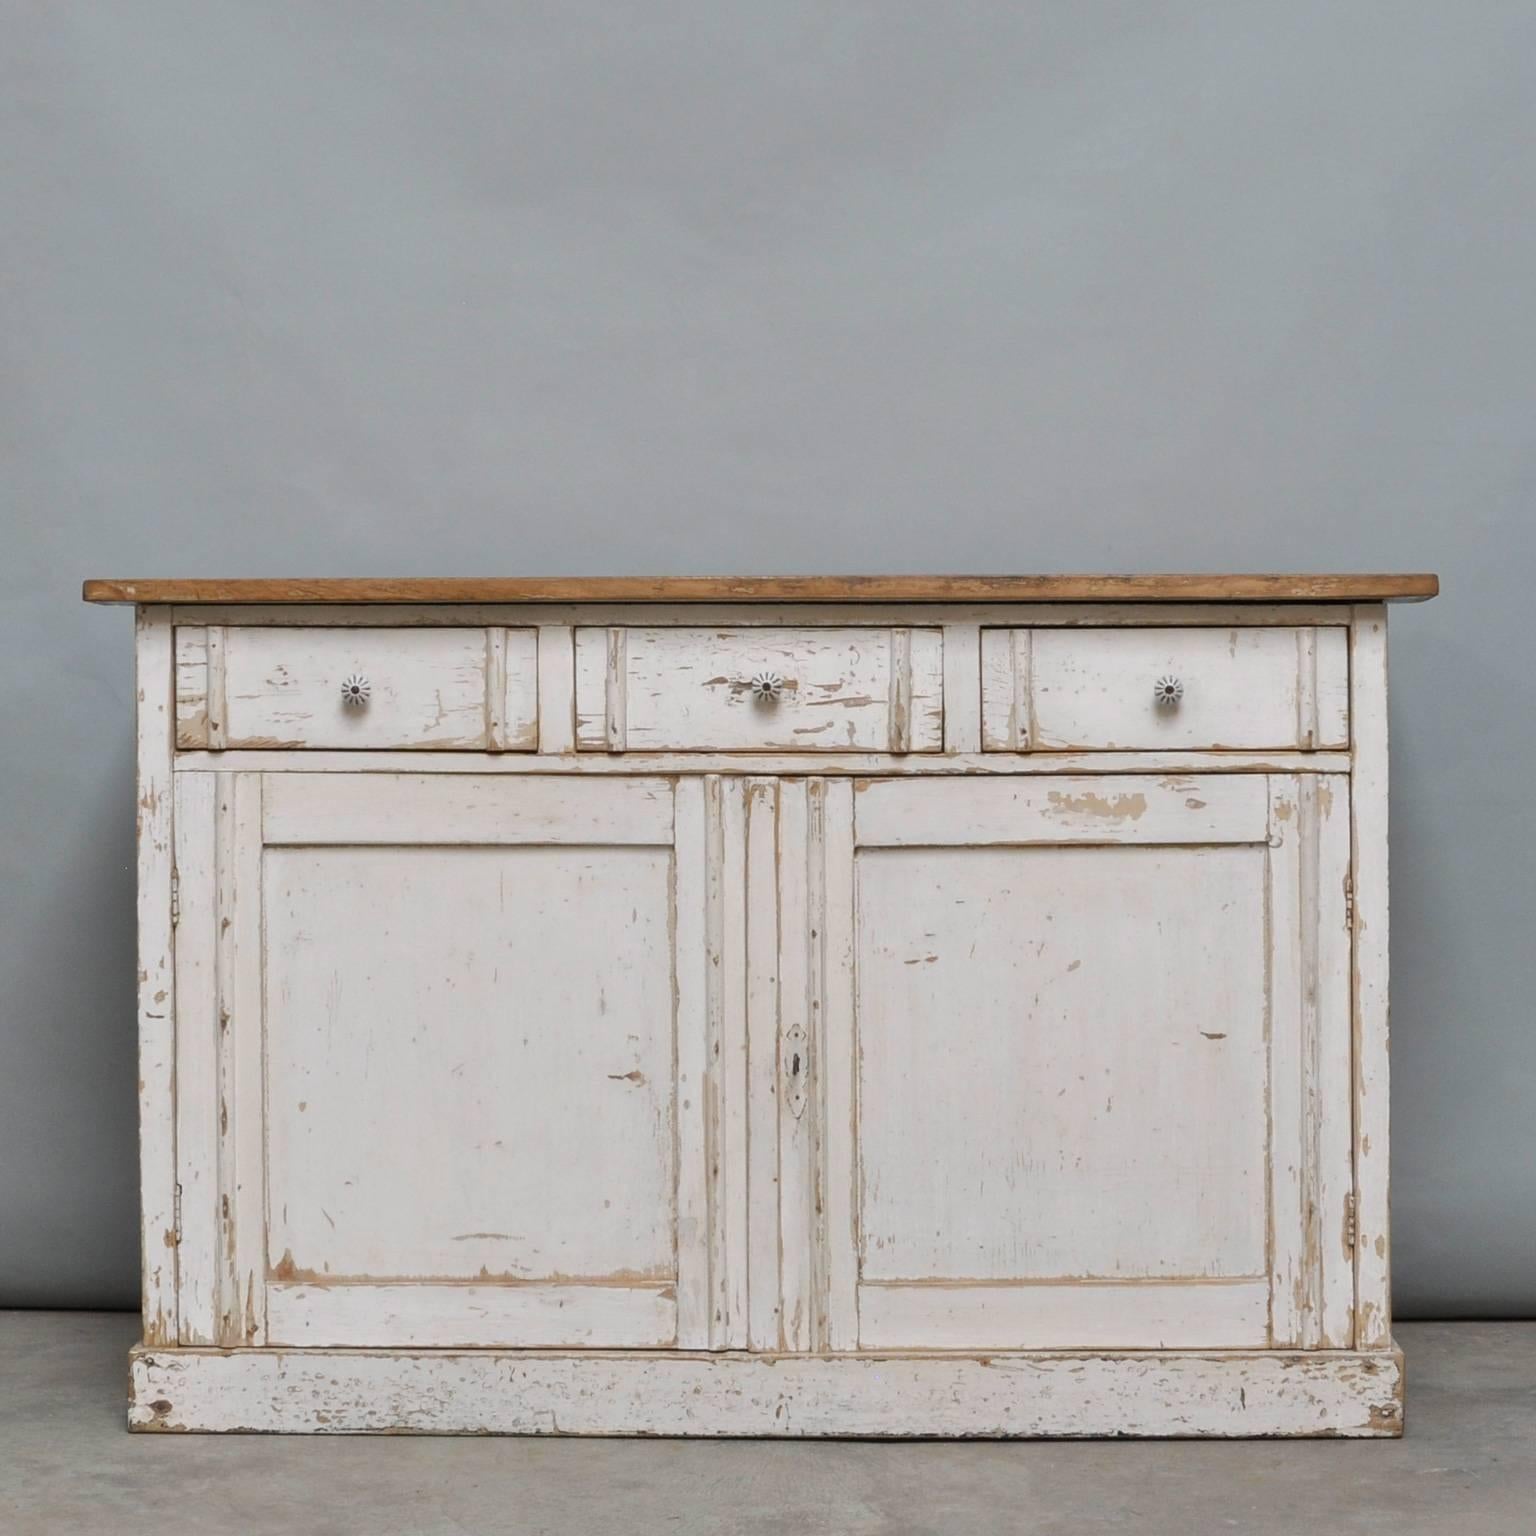 Dressoir made of pine. Produced in the 1930s on the inside three drawers and a shelf. Original paint.